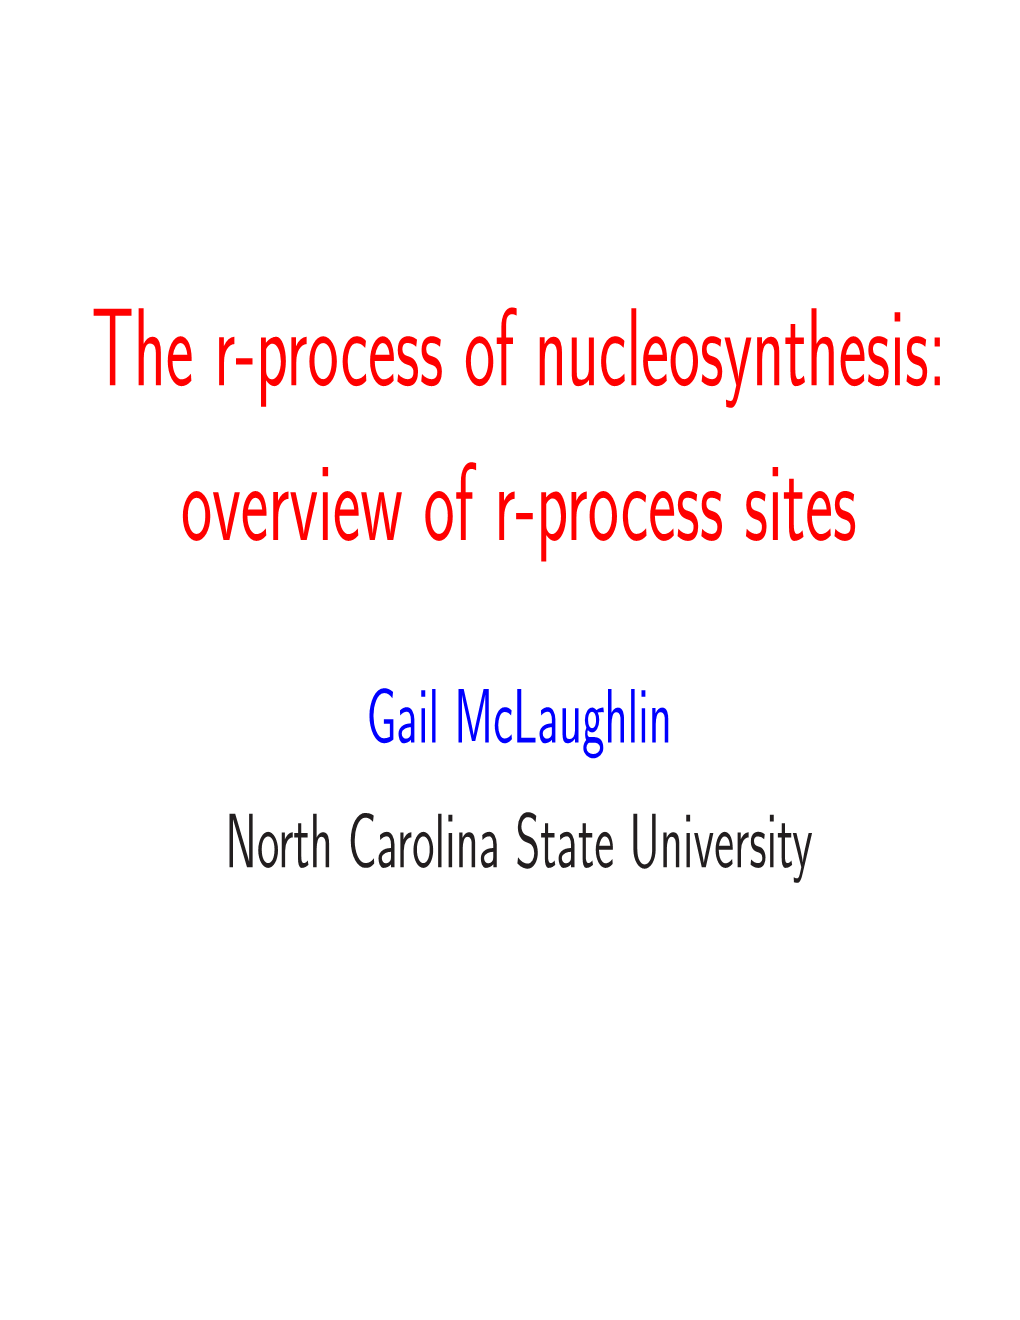 The R-Process of Nucleosynthesis: Overview of R-Process Sites